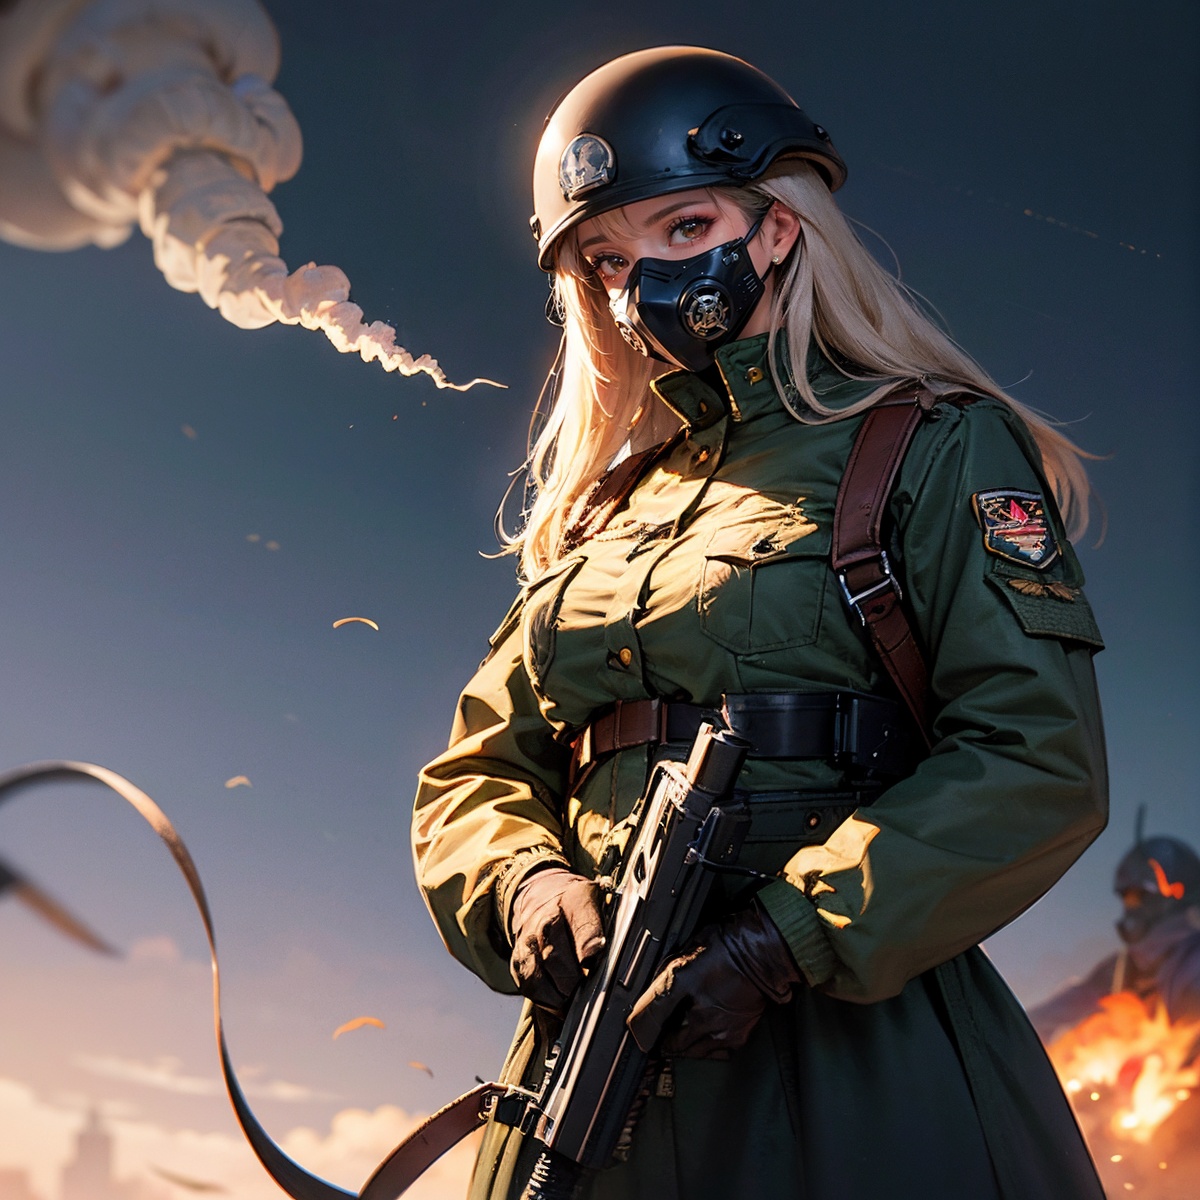 masterpiece,best quality (Darkgiants:1.2),1huge monster,Darkgiants,1girl,gas_mask,gun,hat,helmet,holding,holding_weapon,long_hair,mask,military,military_uniform,multiple_boys,realistic,science_fiction,uniform,weapon,red|blue smoke,white dress,